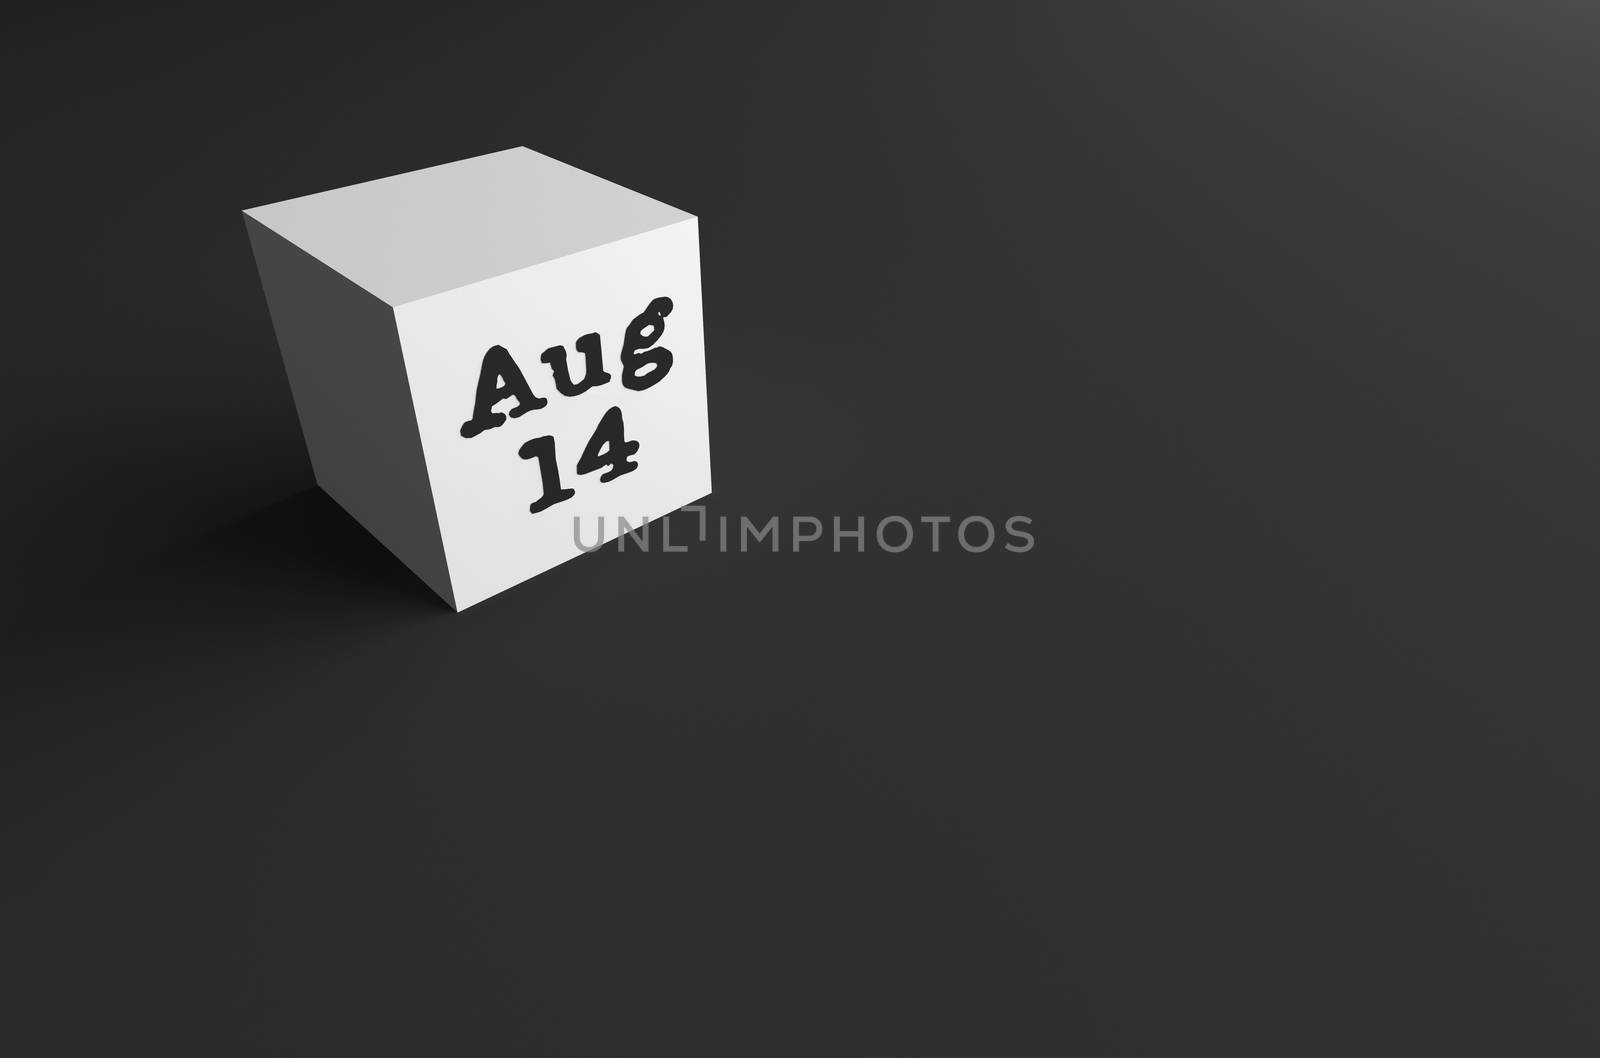 3D RENDERING OF Aug (ABBREVIATION OF AUGUST) 14 ON WHITE CUBE